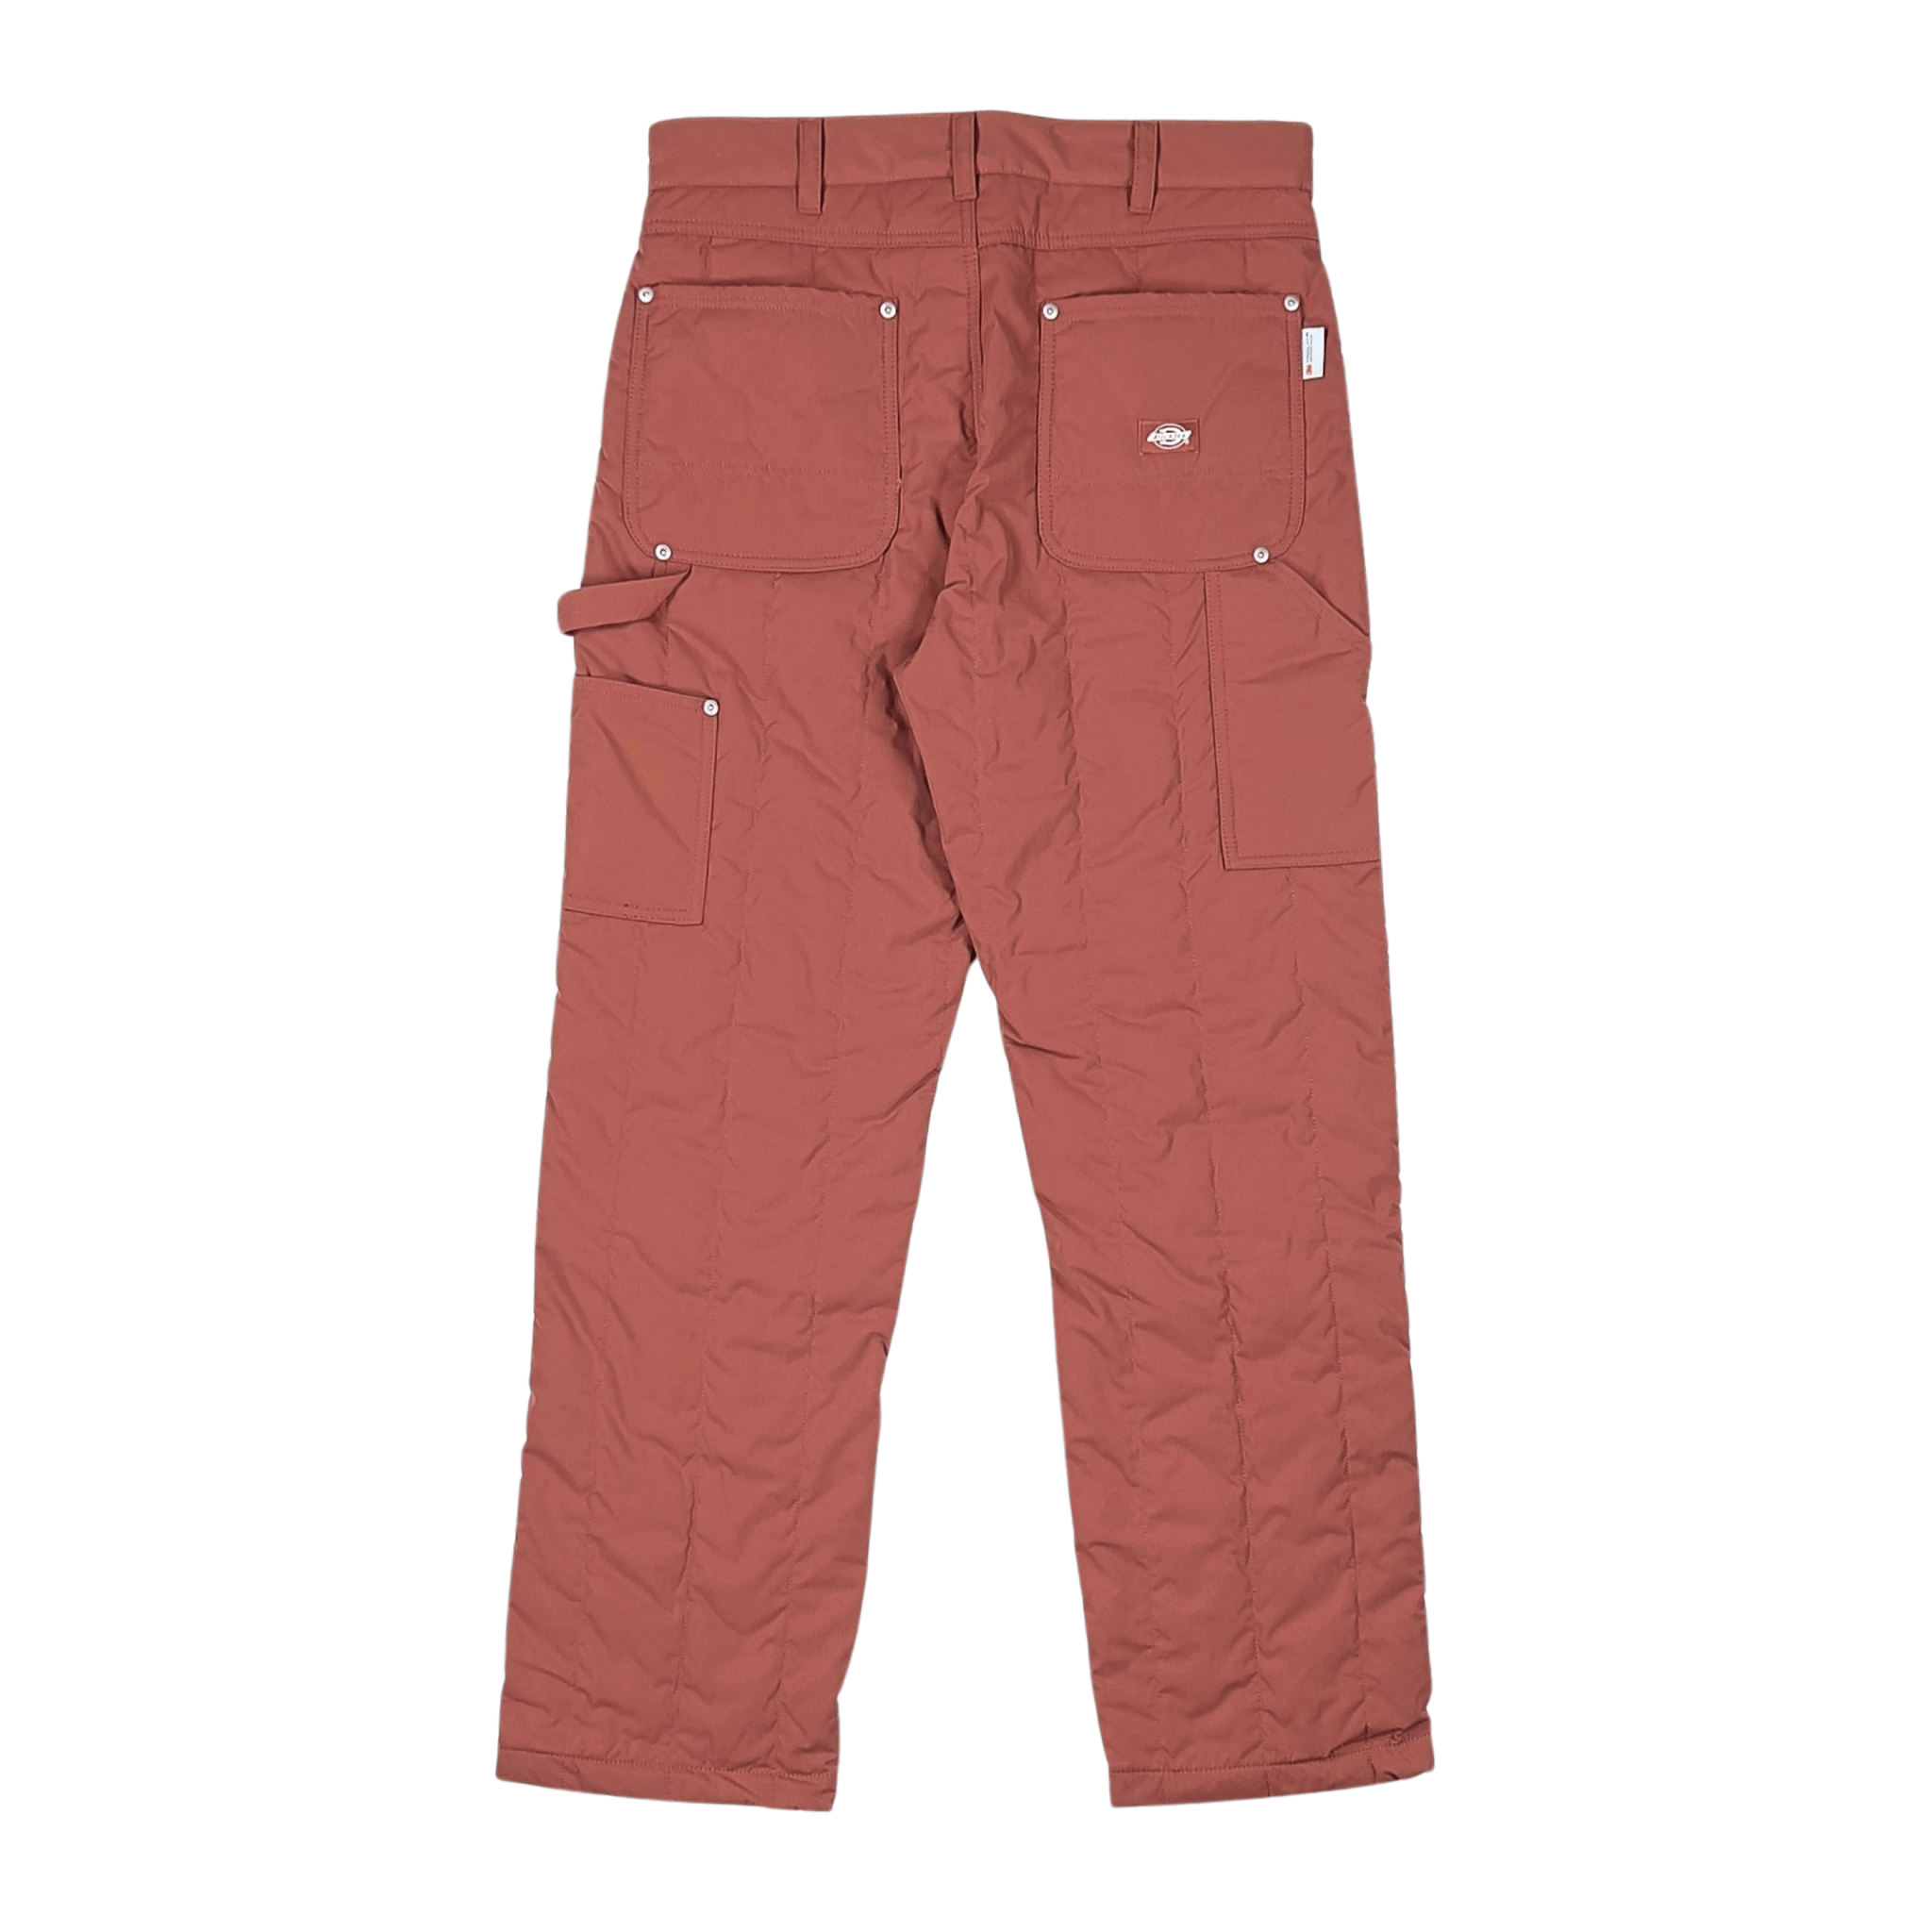 Painters Double Knee Pants in mahogany - Dickies - State Of Flux